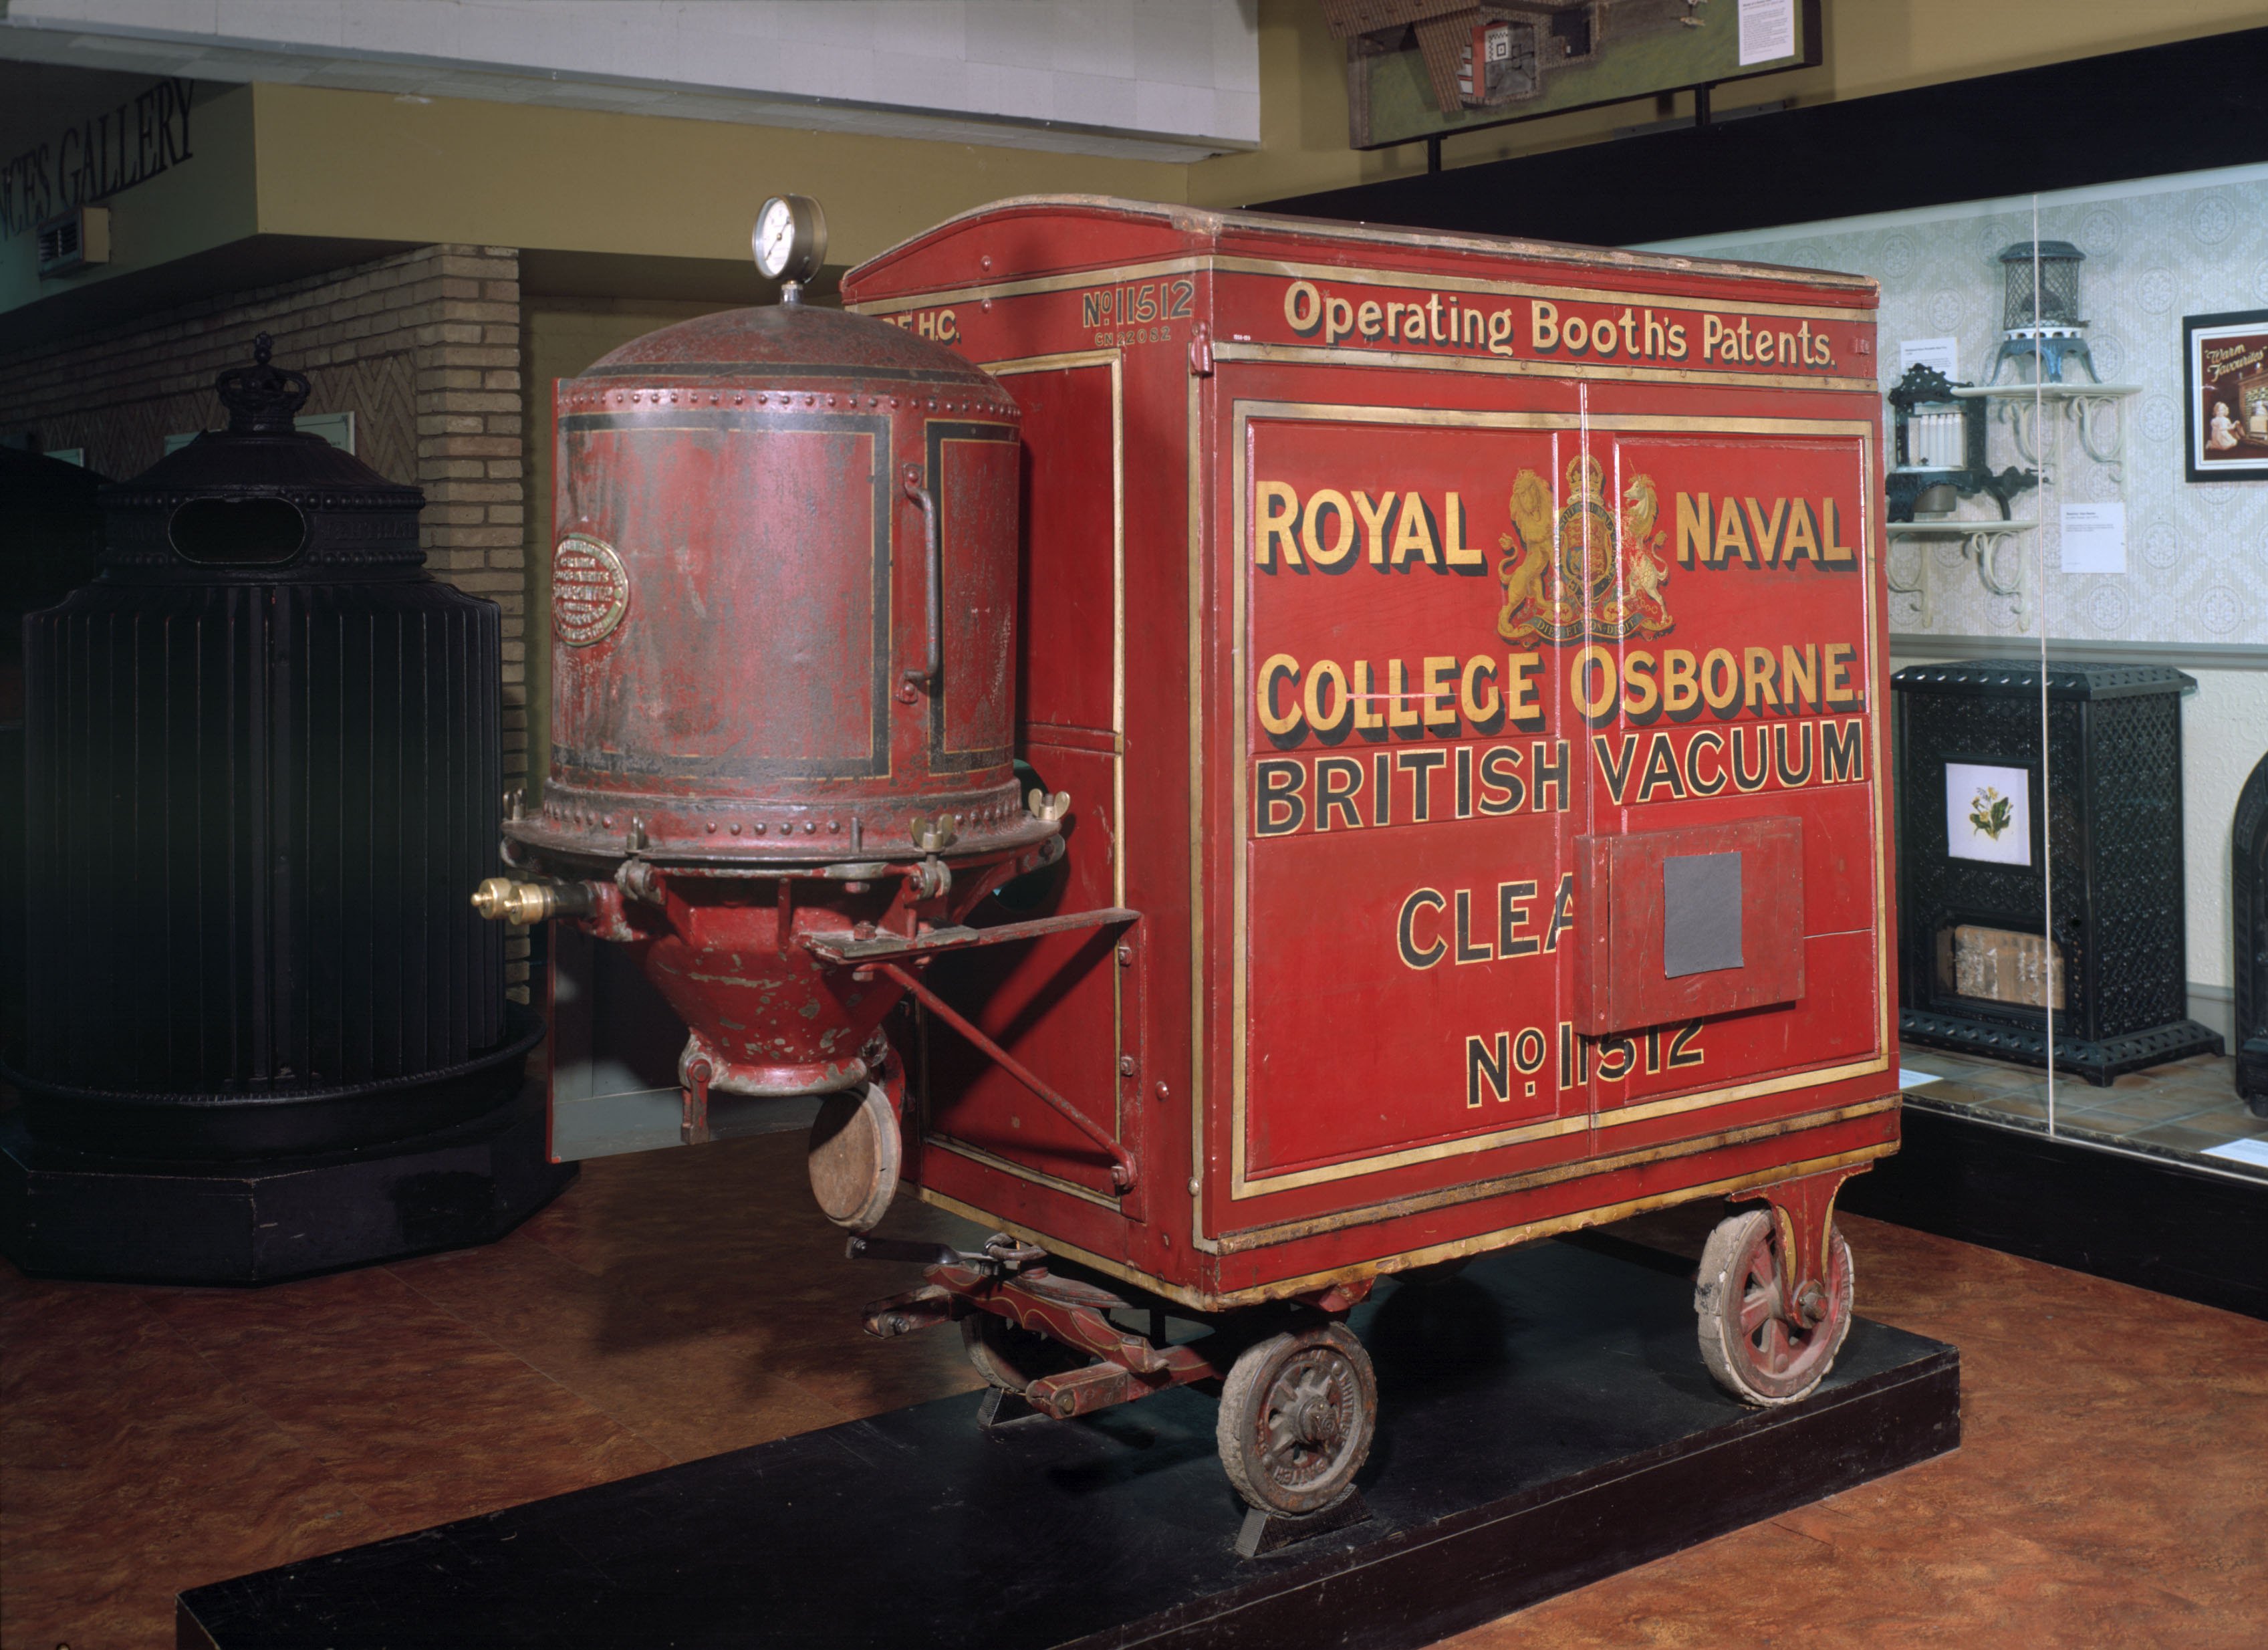 The invention of the vacuum cleaner is generally credited to Hubert Cecil Booth. He built his first machine in 1901 and this one is very similar. It was made for Osborne House, a training college for naval officers on the Isle of Wight. (Science & Society Picture Library/Getty Images)